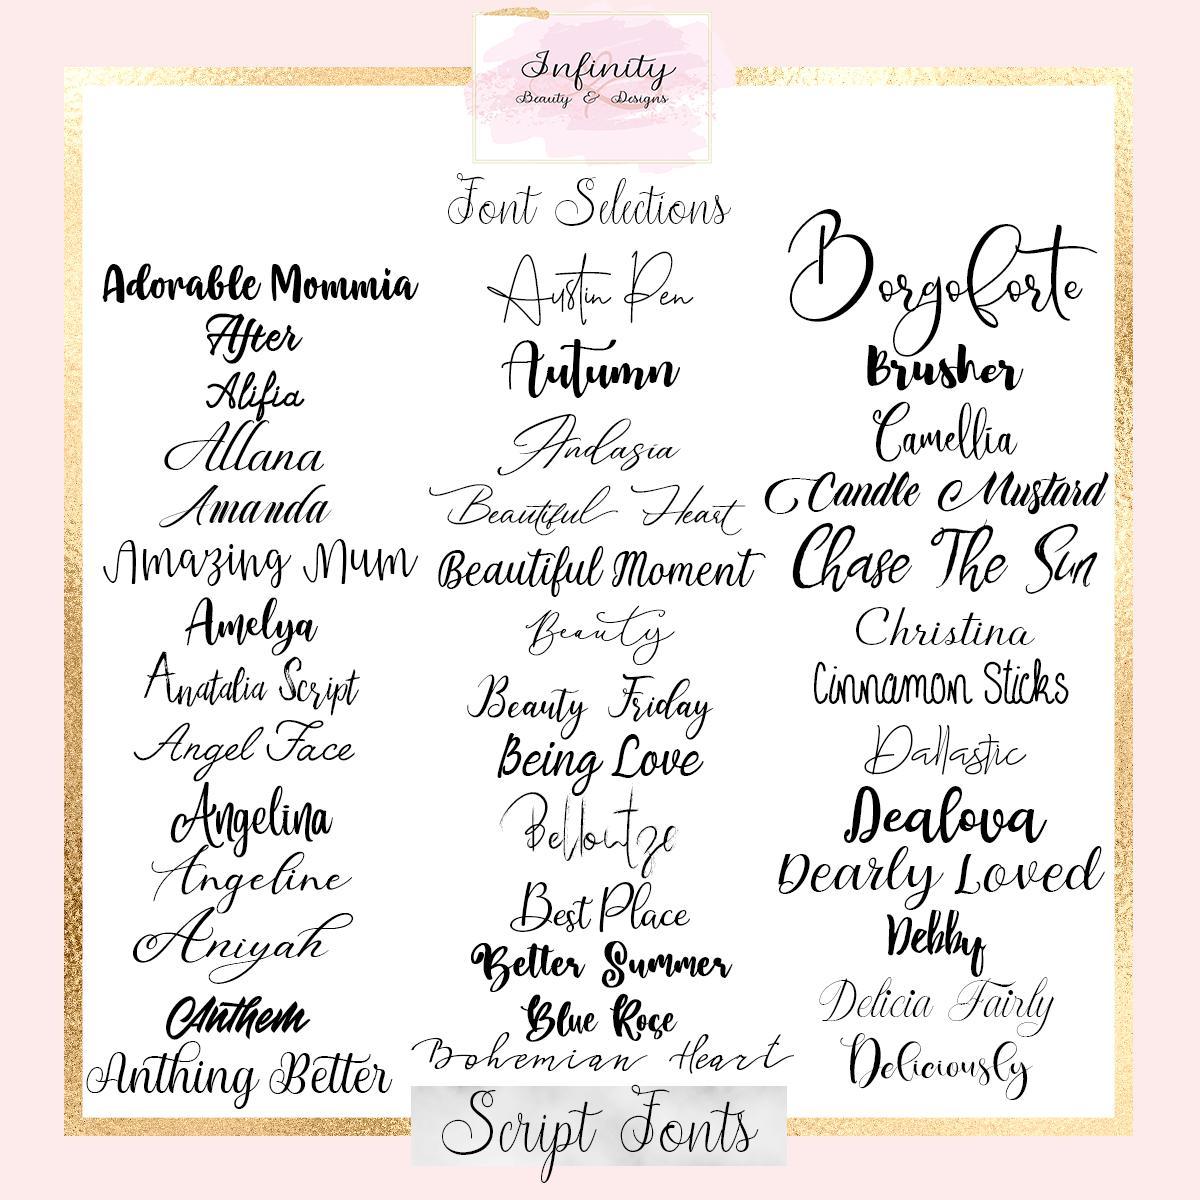 First Day Boards-Infinity Beauty & Designs